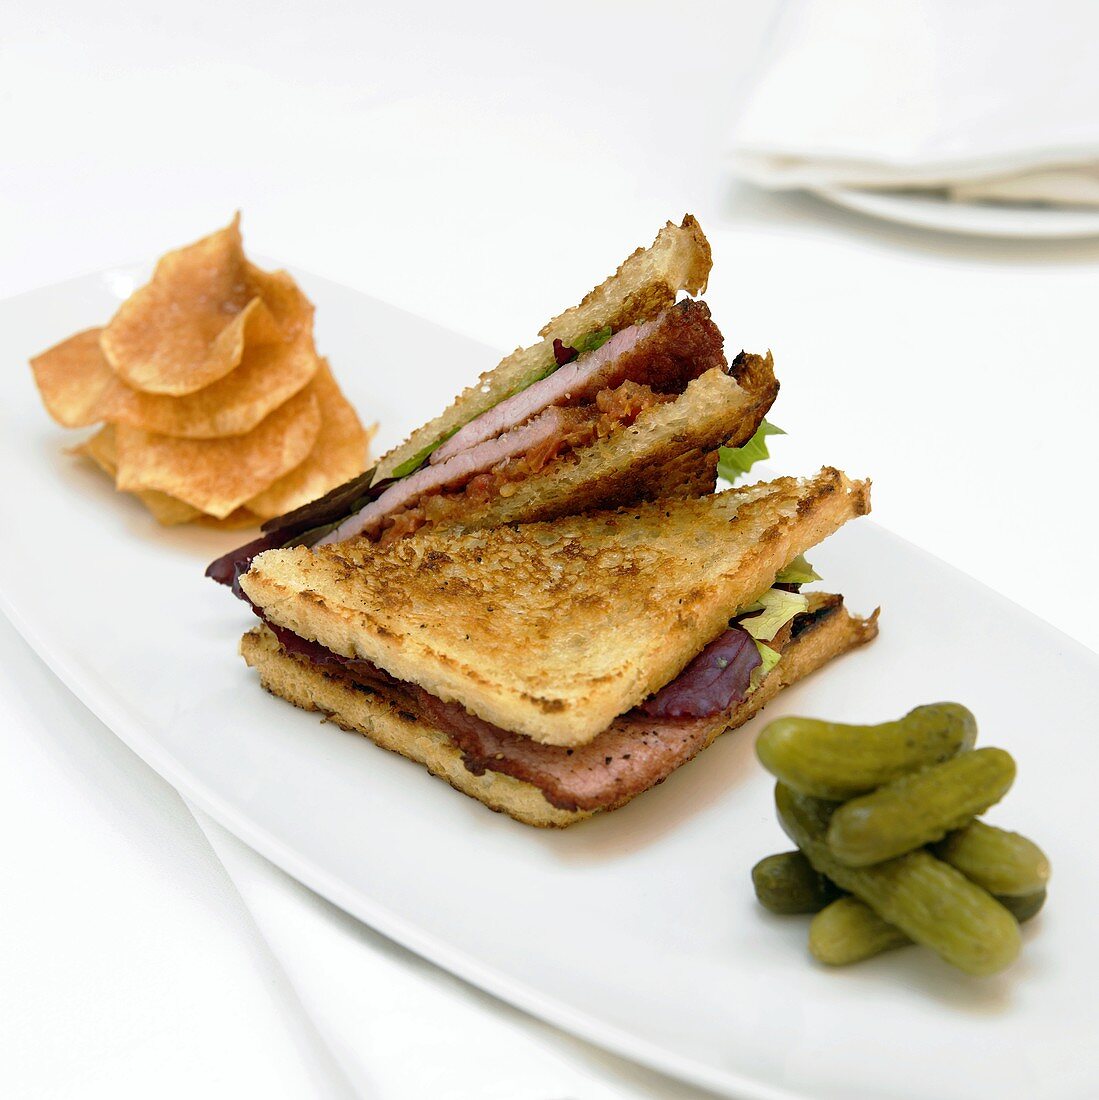 Grilled Ham Sandwich, BLT, On a Plate with Pickles and Chips